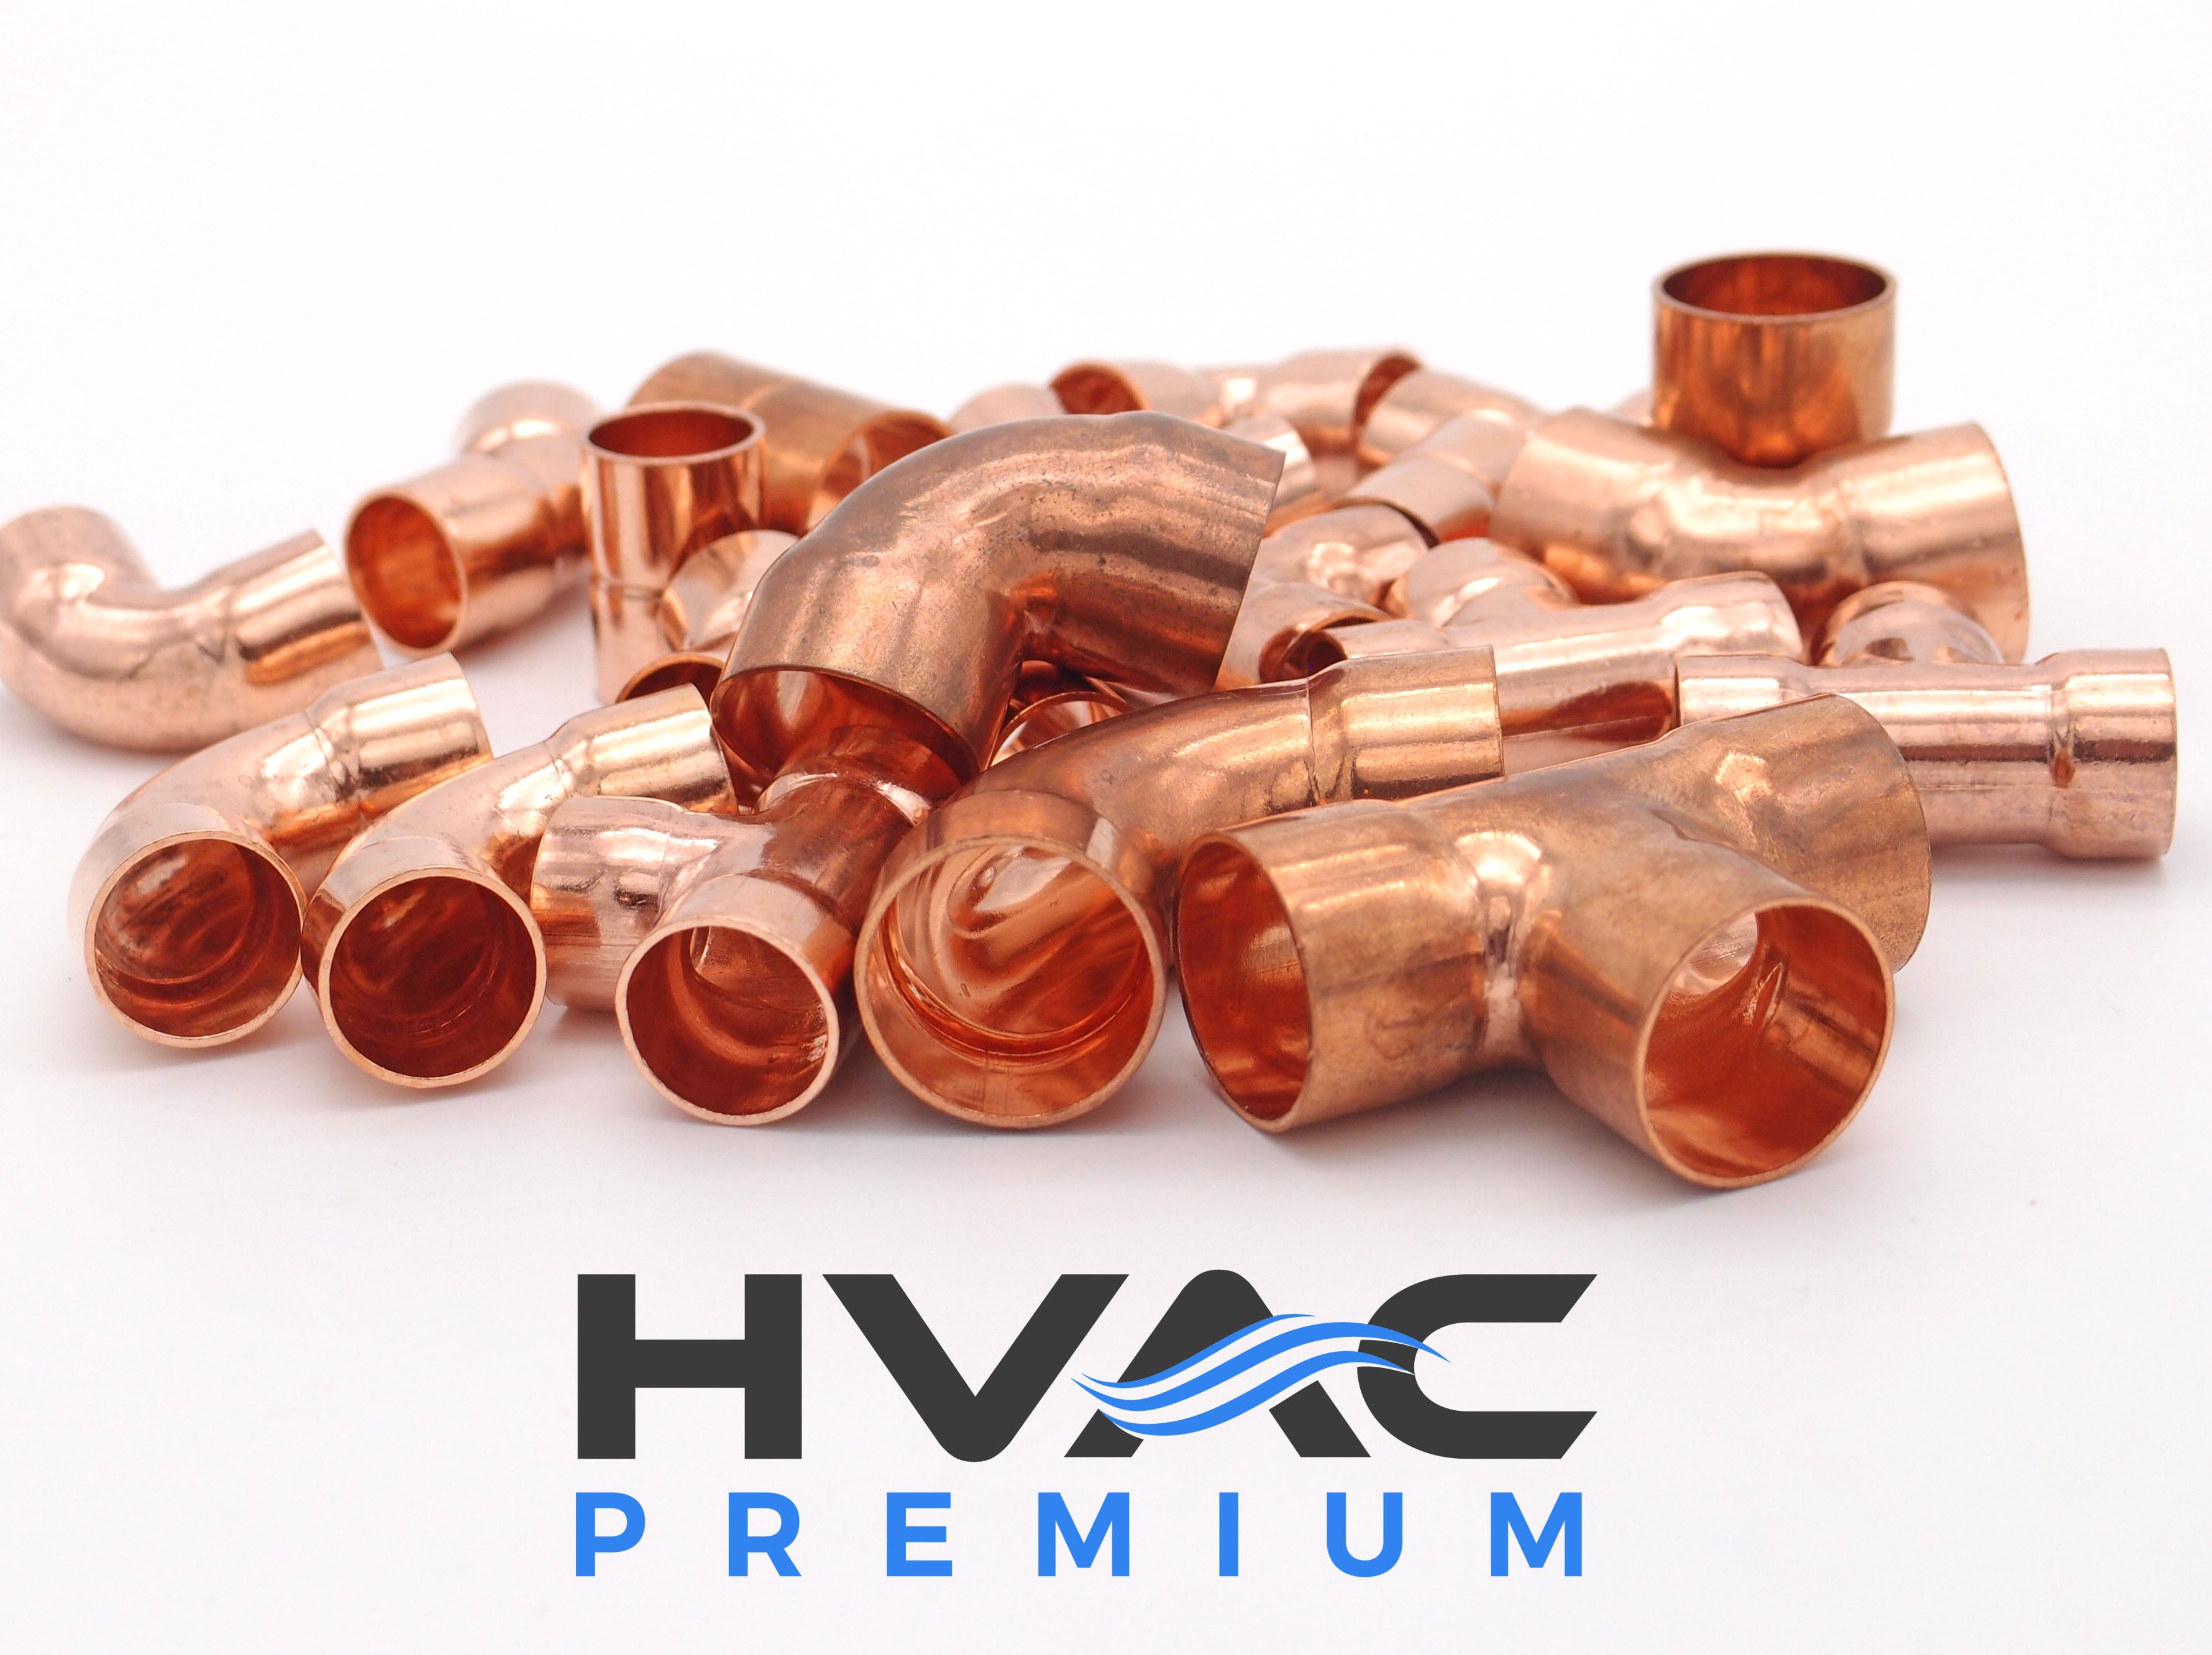 Copper Fitting 1 Inch (HVAC Outer Dimension) 7/8 Inch (Plumbing Inner Dimension) - Straight Copper Coupling Fittings With Rolled Tube Stop & HVAC – 99.9% Pure Copper - 10 Pack